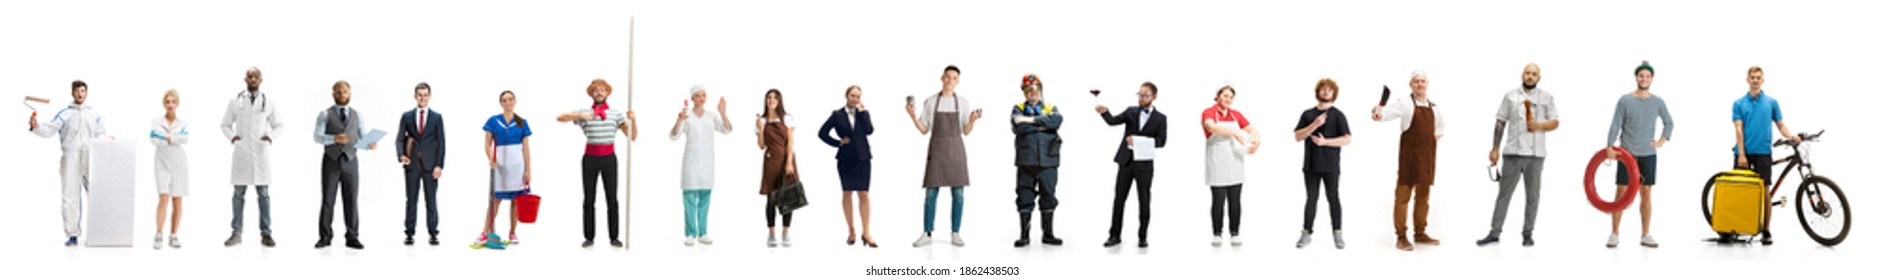 Art collage. Man and woman with different professions on white studio background, horizontal. Modern workers of diverse occupations like stylist, painter, farmer, accountant with equipment